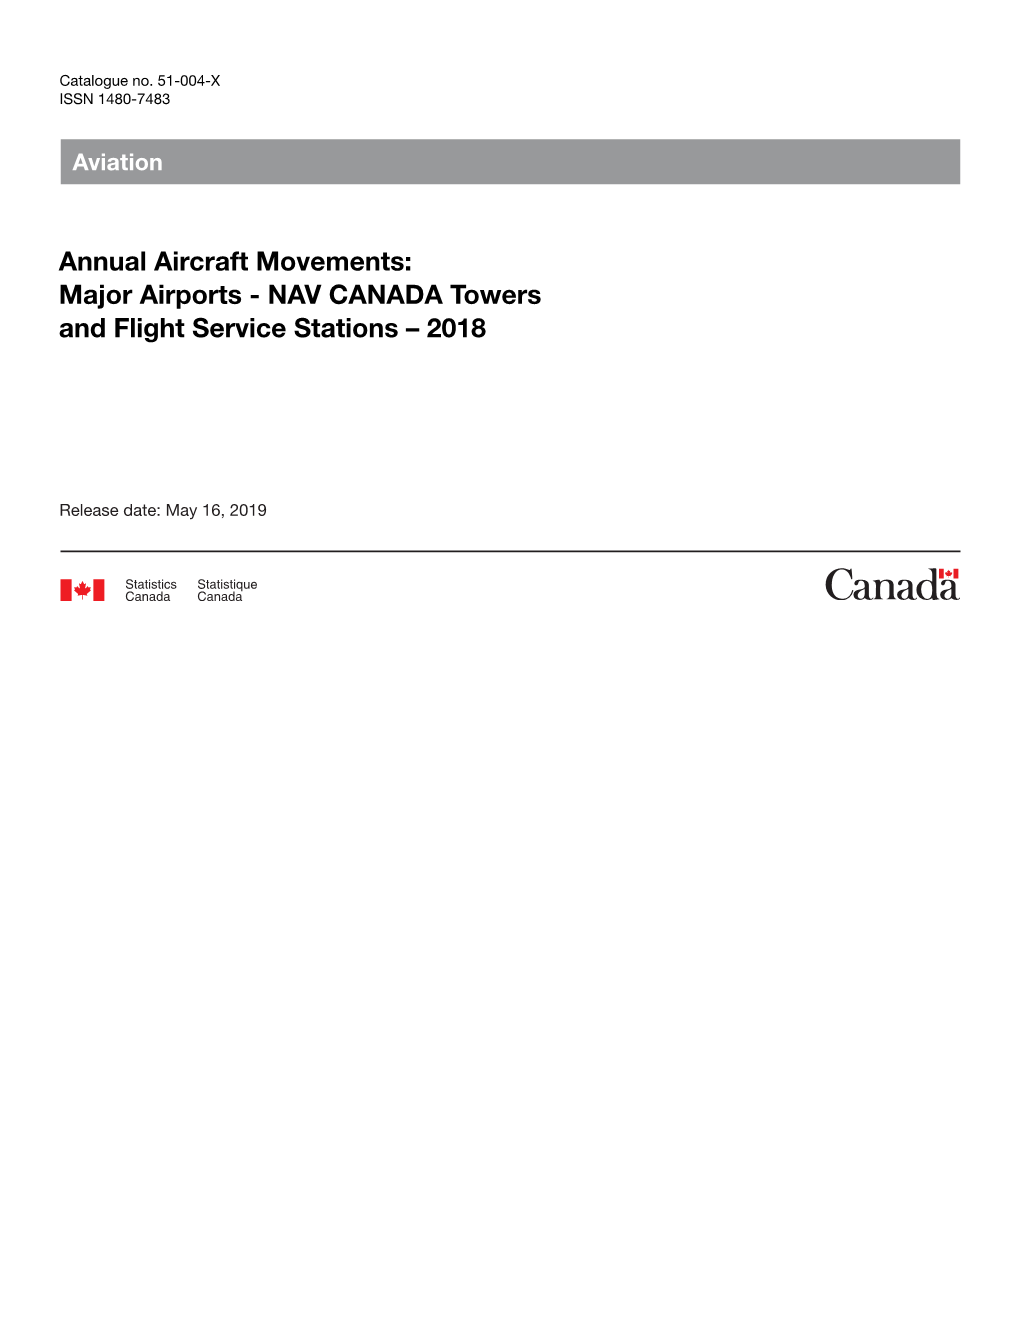 Annual Aircraft Movements: Major Airports - NAV CANADA Towers and Flight Service Stations – 2018